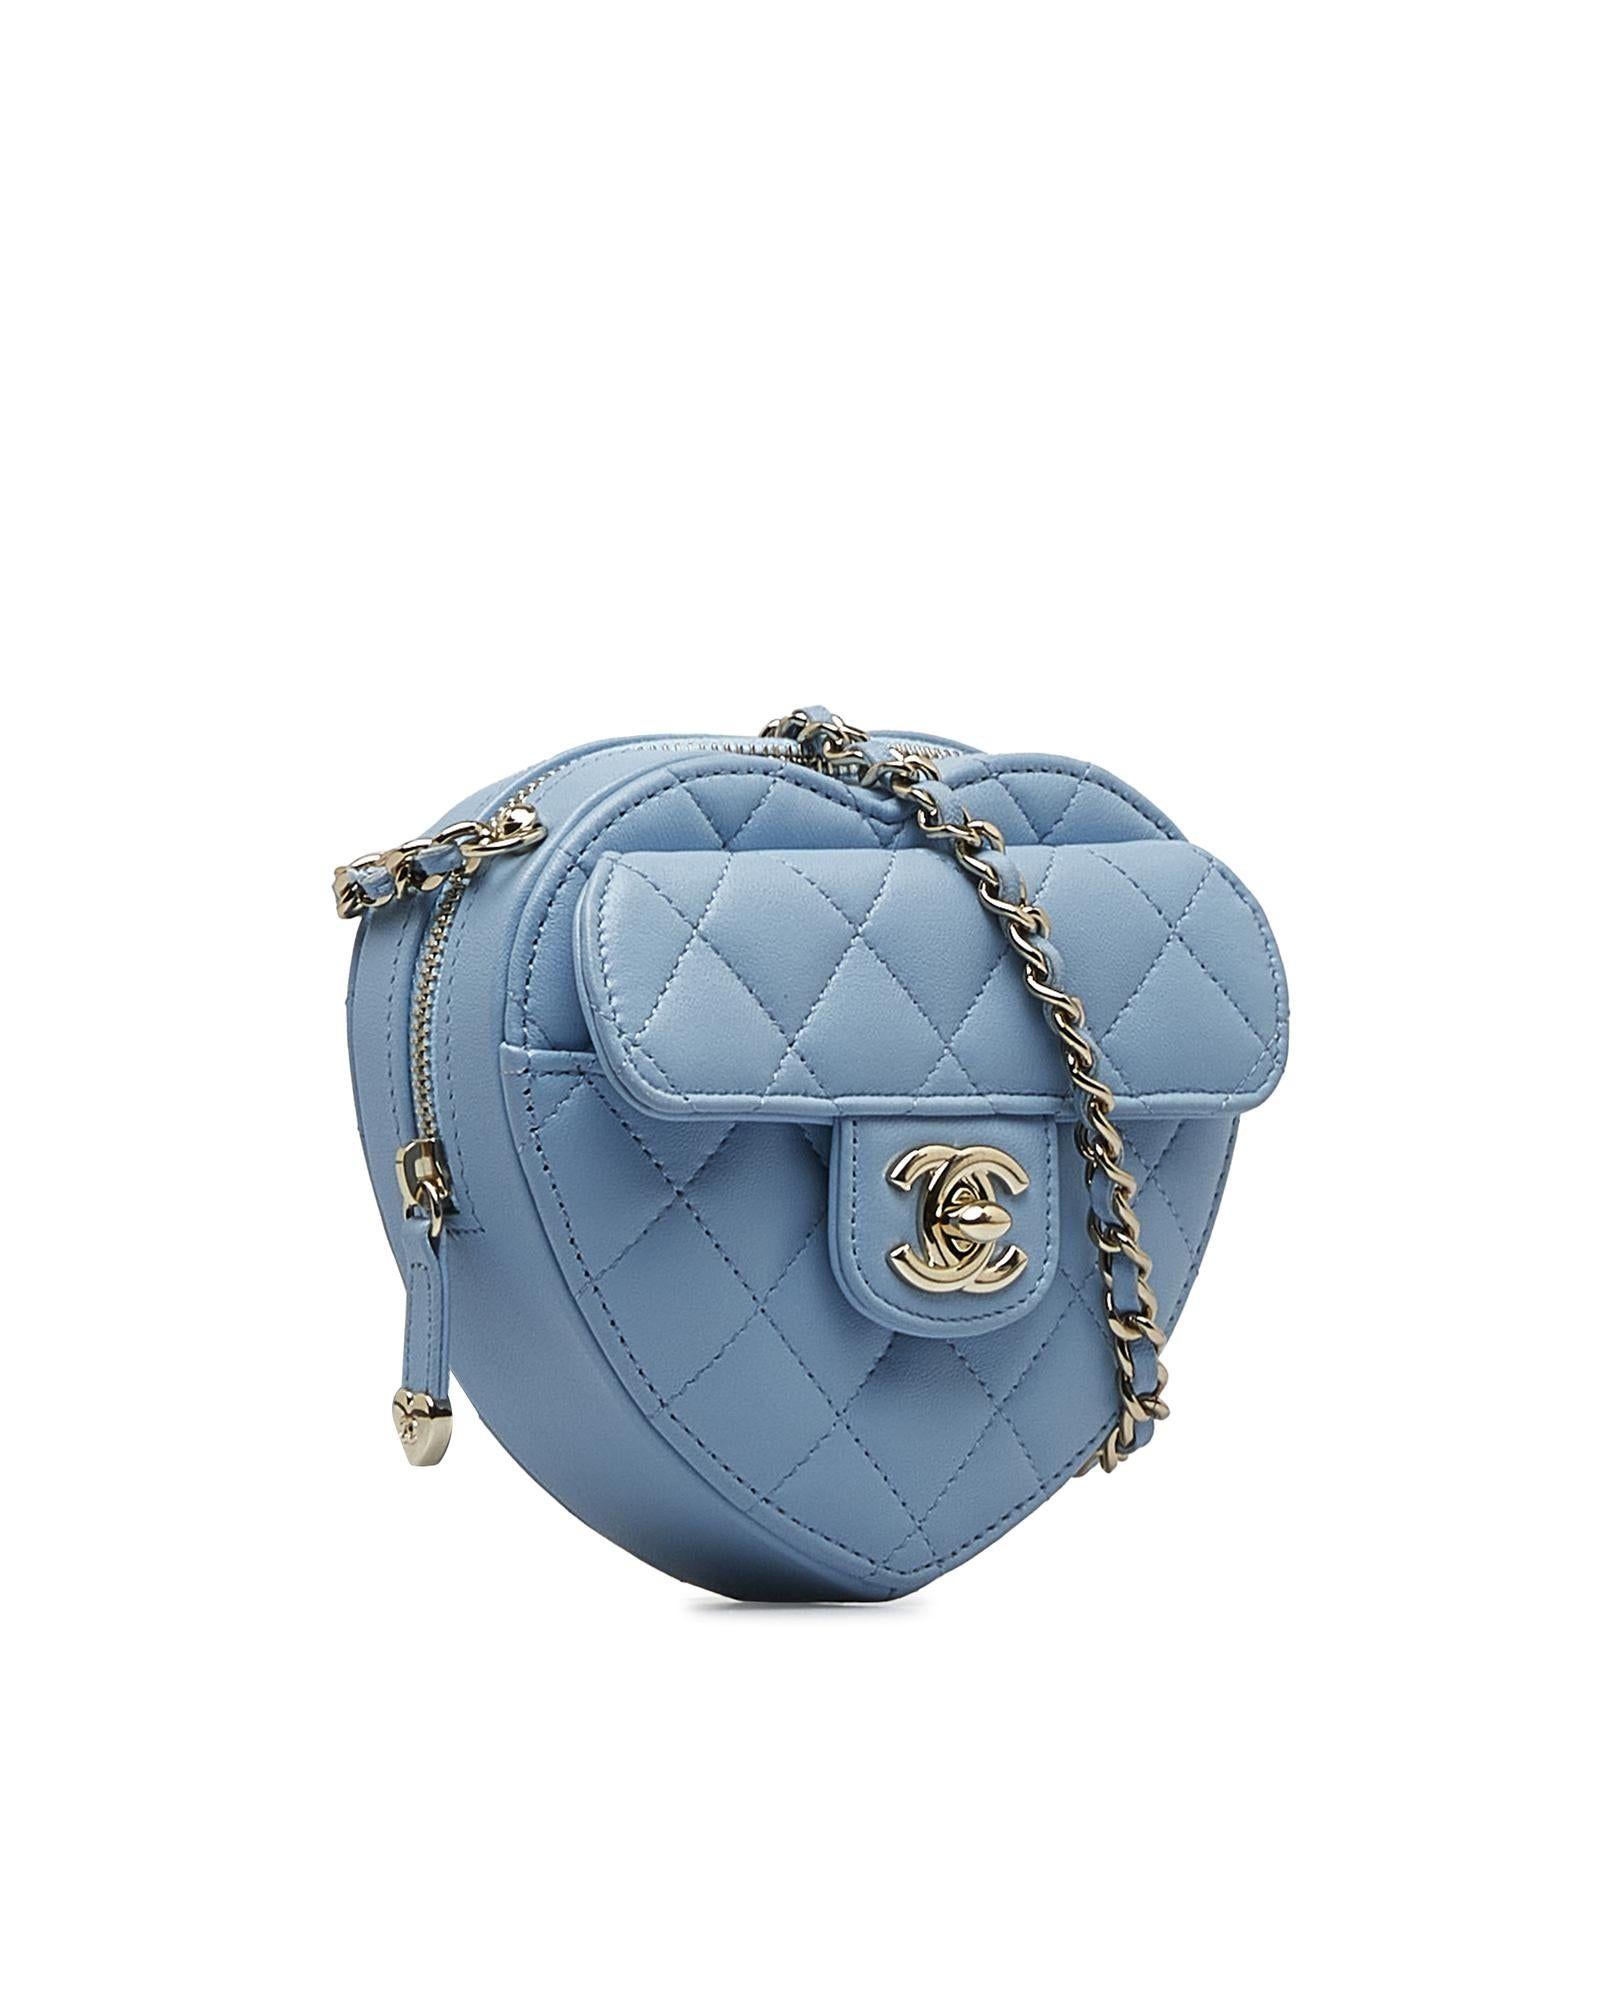 Chanel Quilted Lambskin Crossbody With Chain Strap in Blue